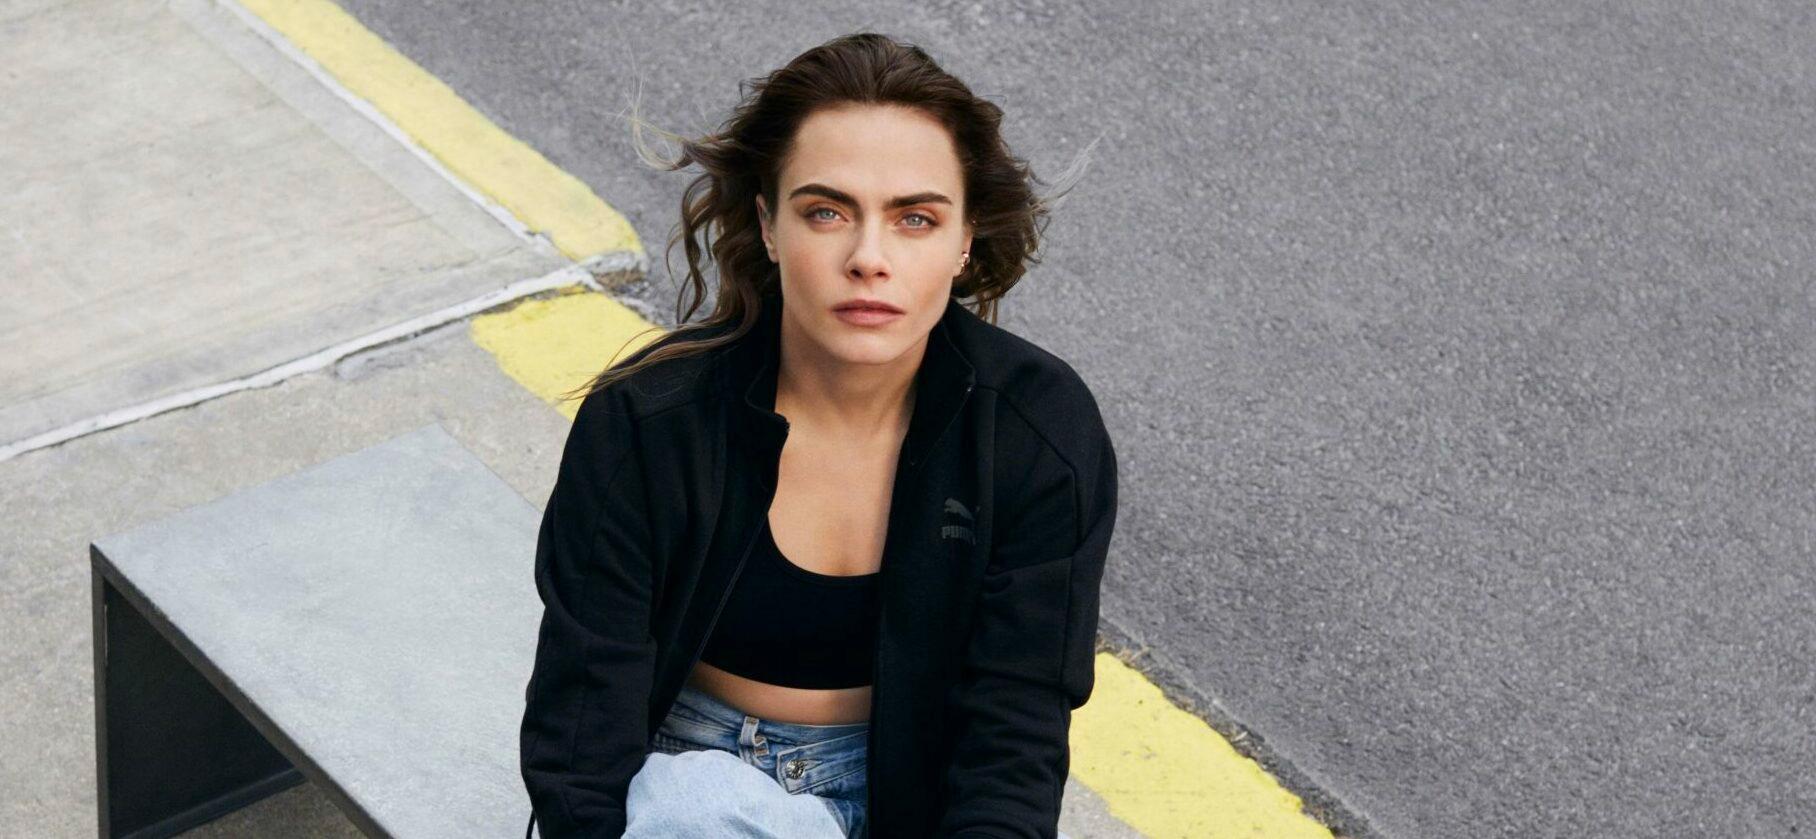 Cara Delevingne Shares Her Struggle With Alcohol Abuse, Now 4-Months Sober